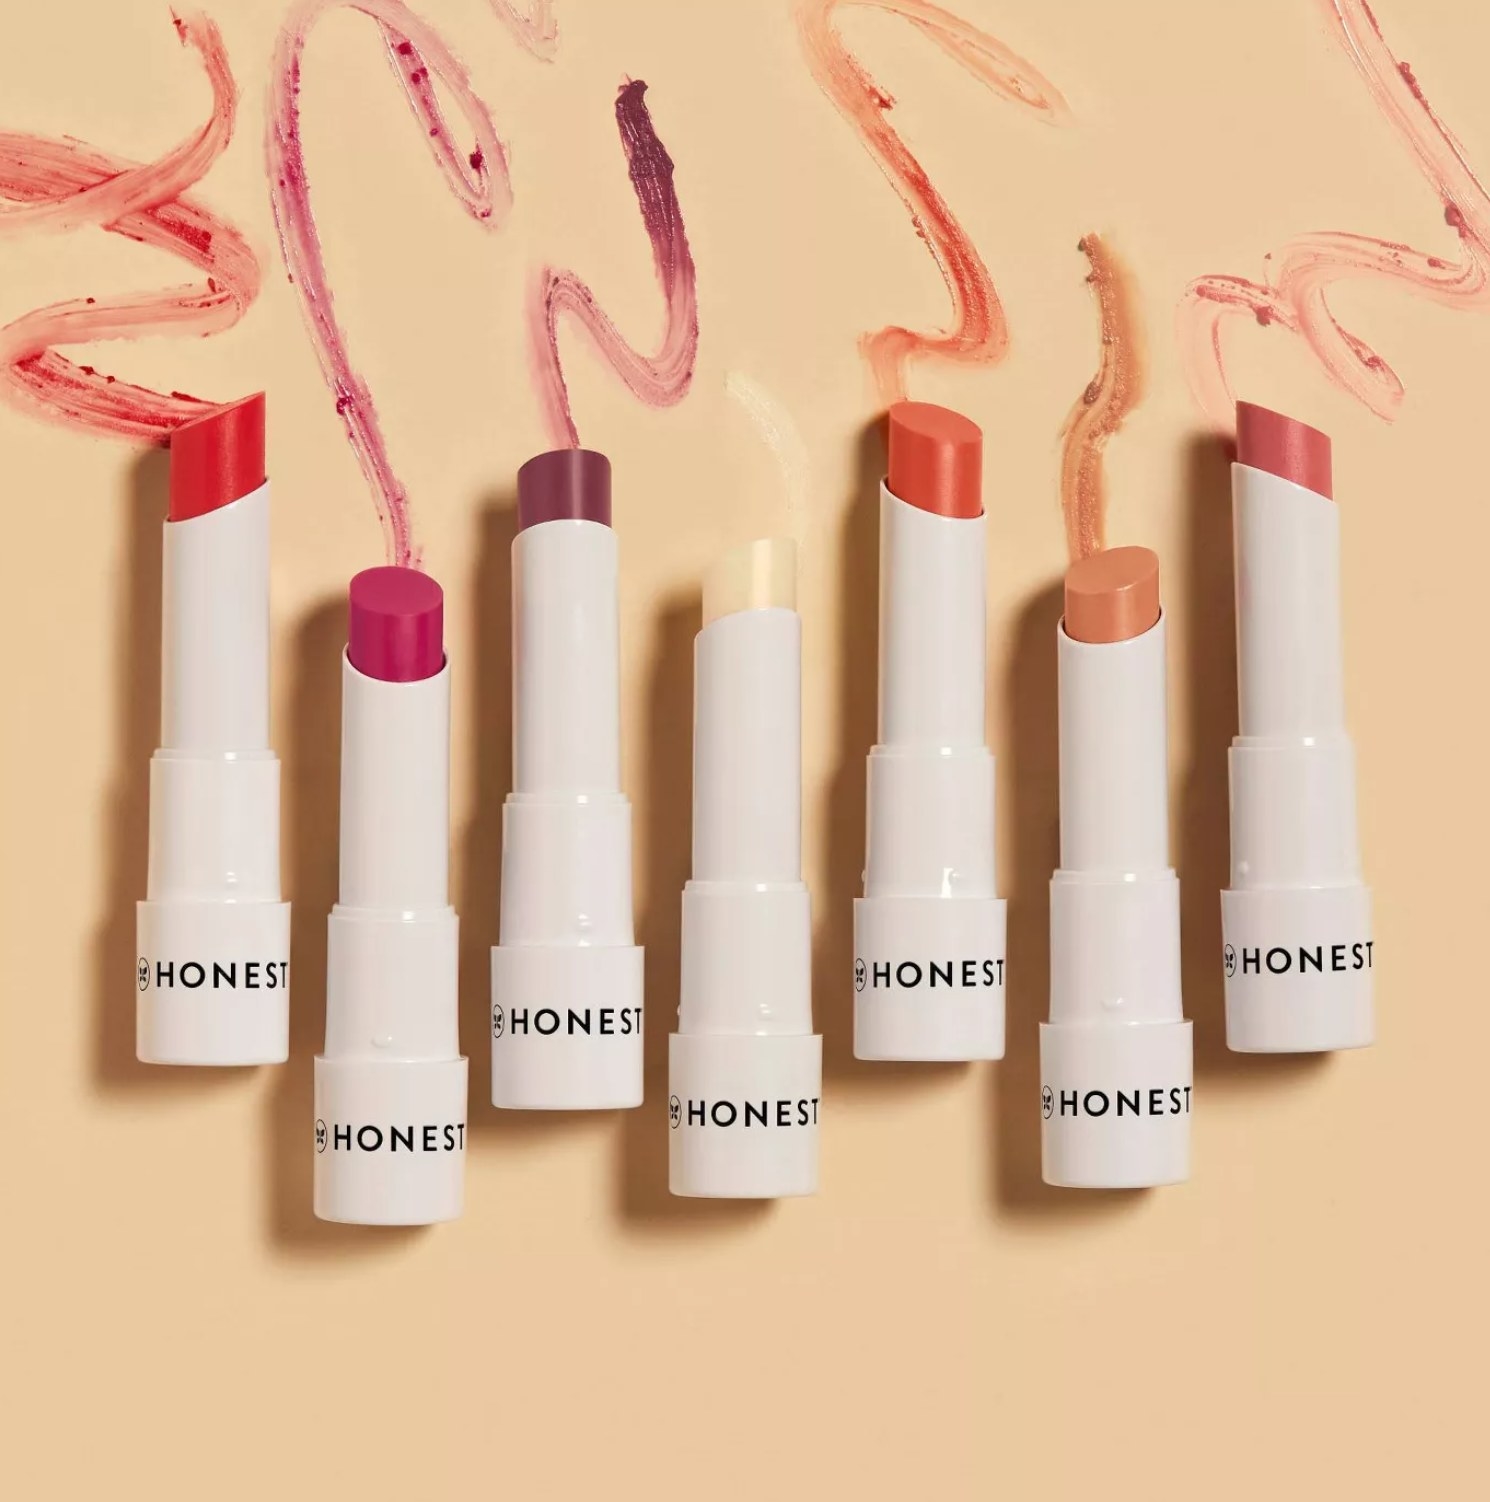 seven of the lip shades set against a tan background with streaks above them to show off the colors